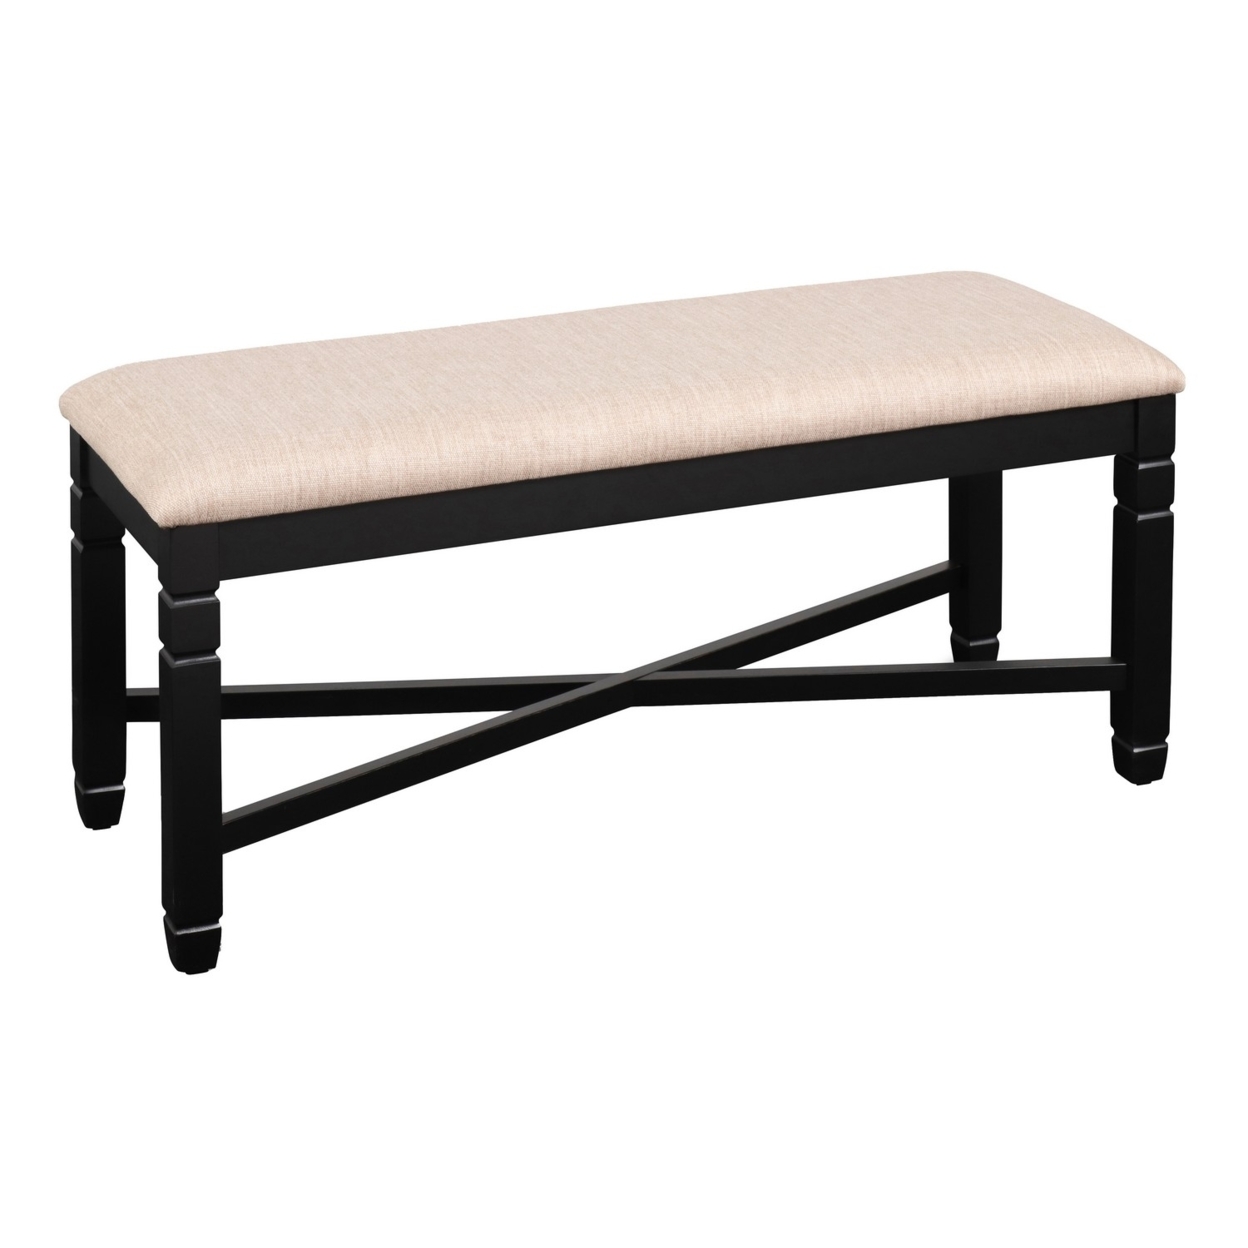 Fabric Dining Bench With Turned Legs And X Shaped Support, Beige And Black- Saltoro Sherpi